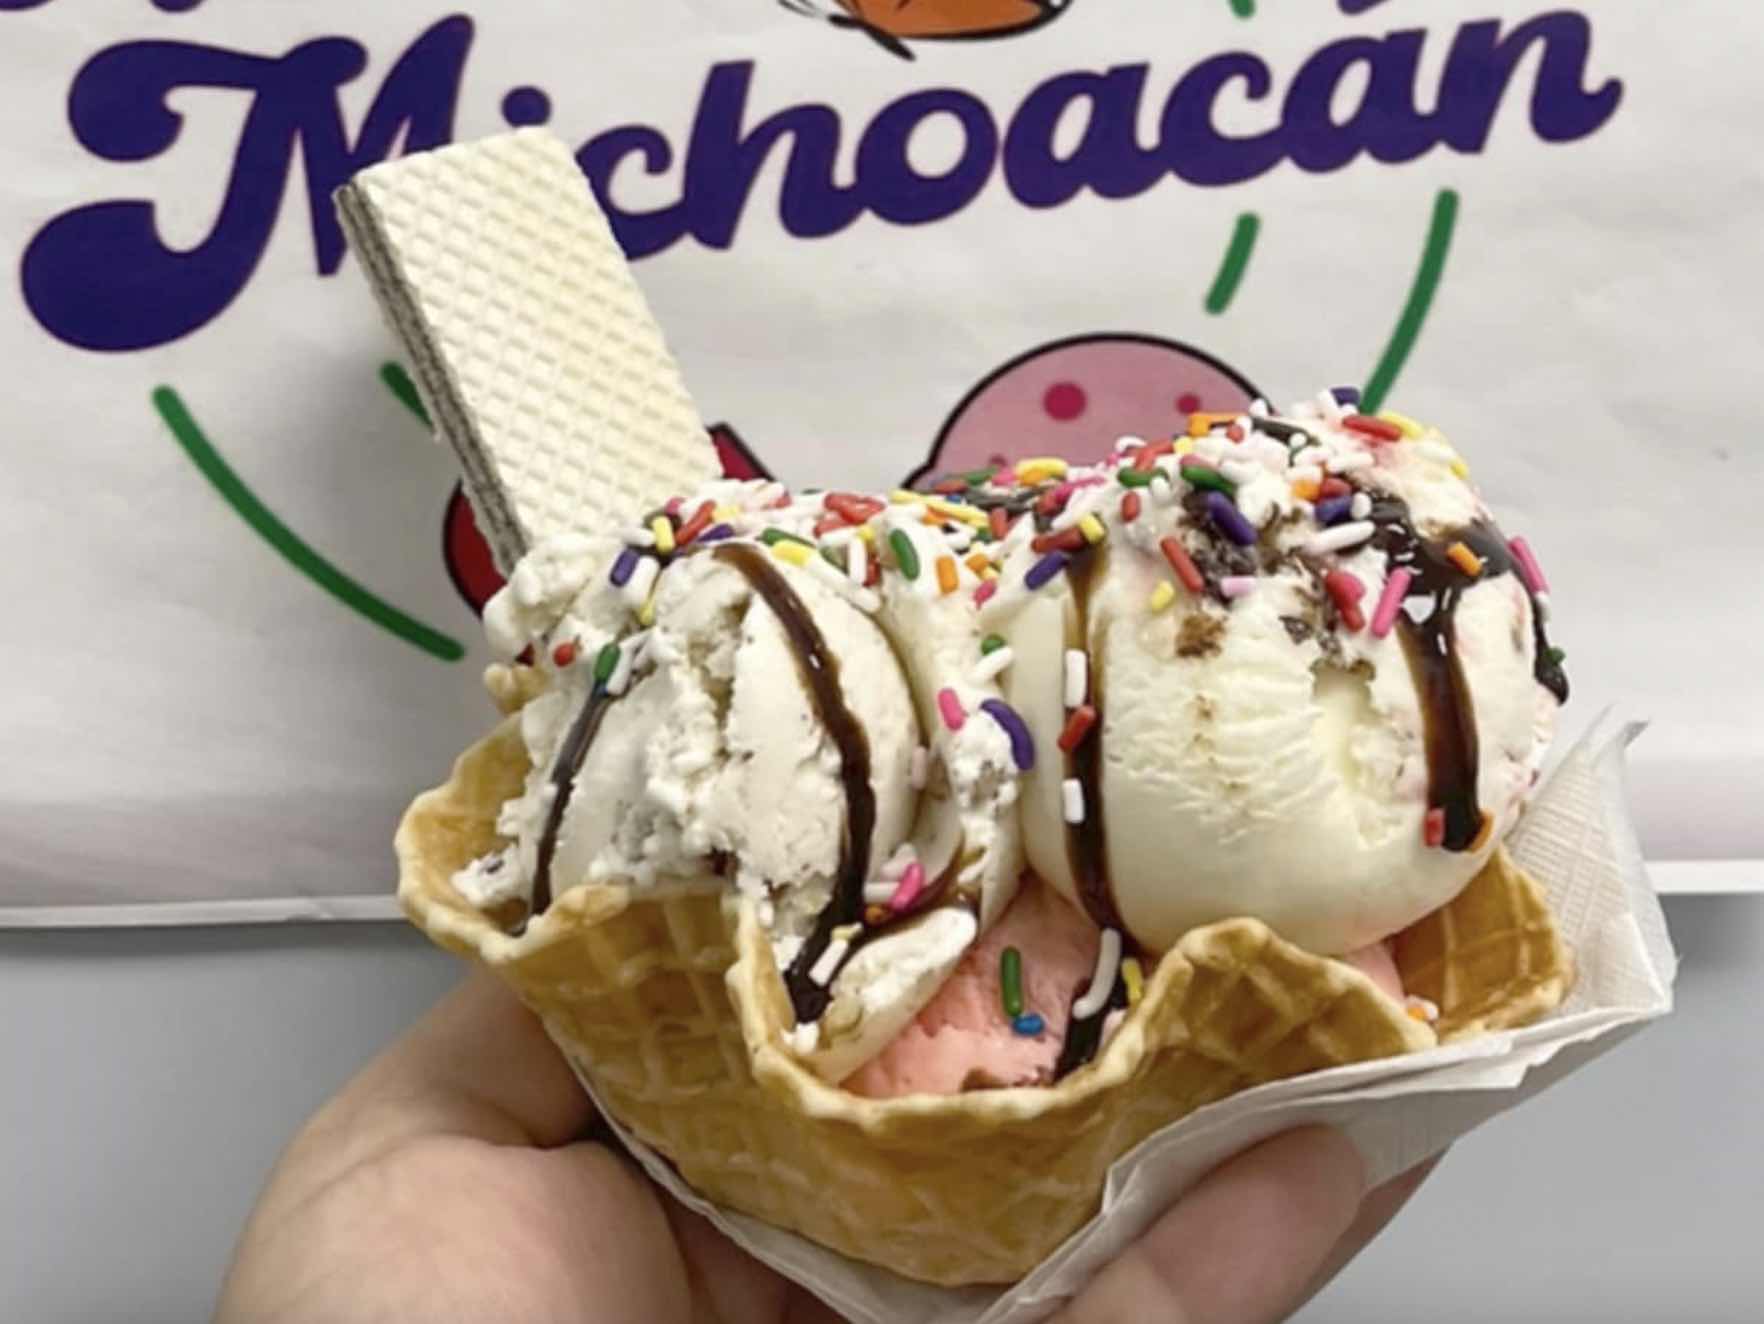 Two scoops of ice cream in a waffle bowl with whipped cream, chocolate syrup, and rainbow sprinkles.